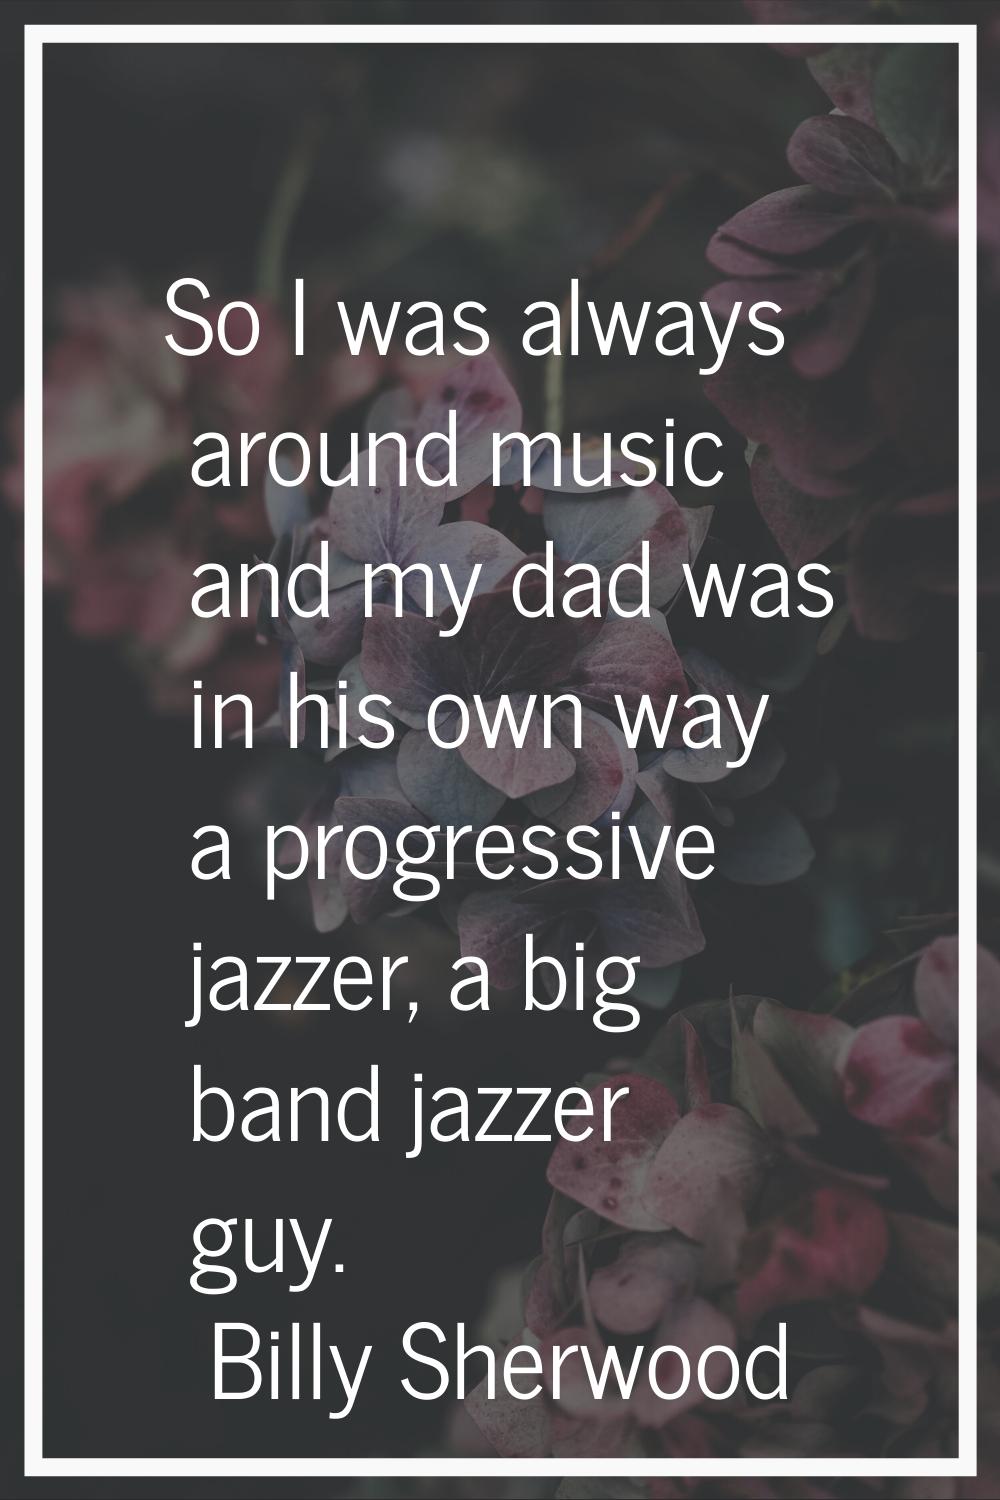 So I was always around music and my dad was in his own way a progressive jazzer, a big band jazzer 